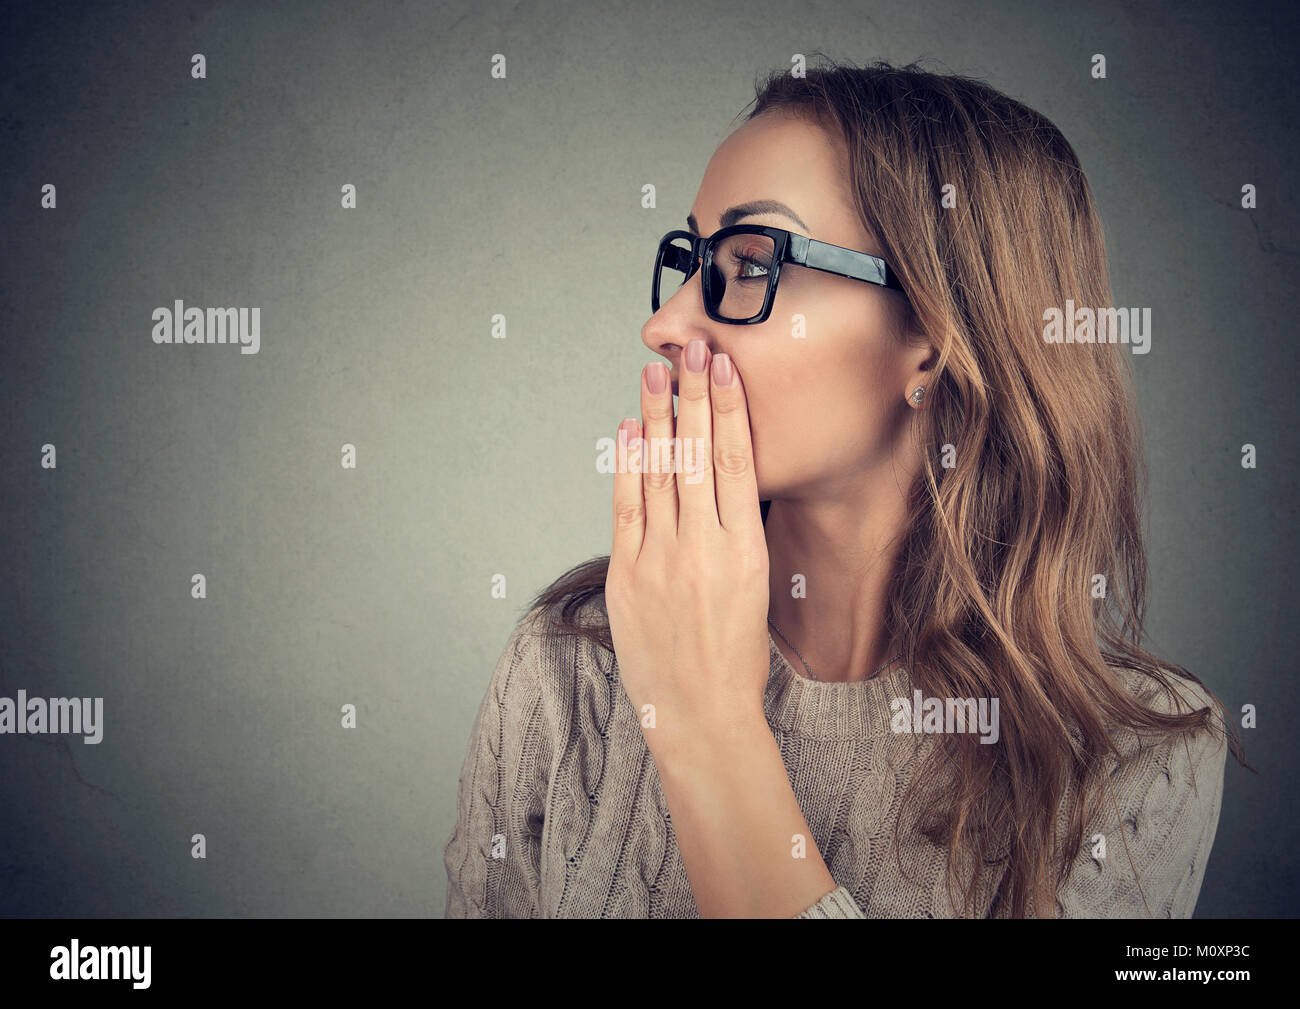 Young woman covering mouth while telling secret posing on gray backdrop. Stock Photo